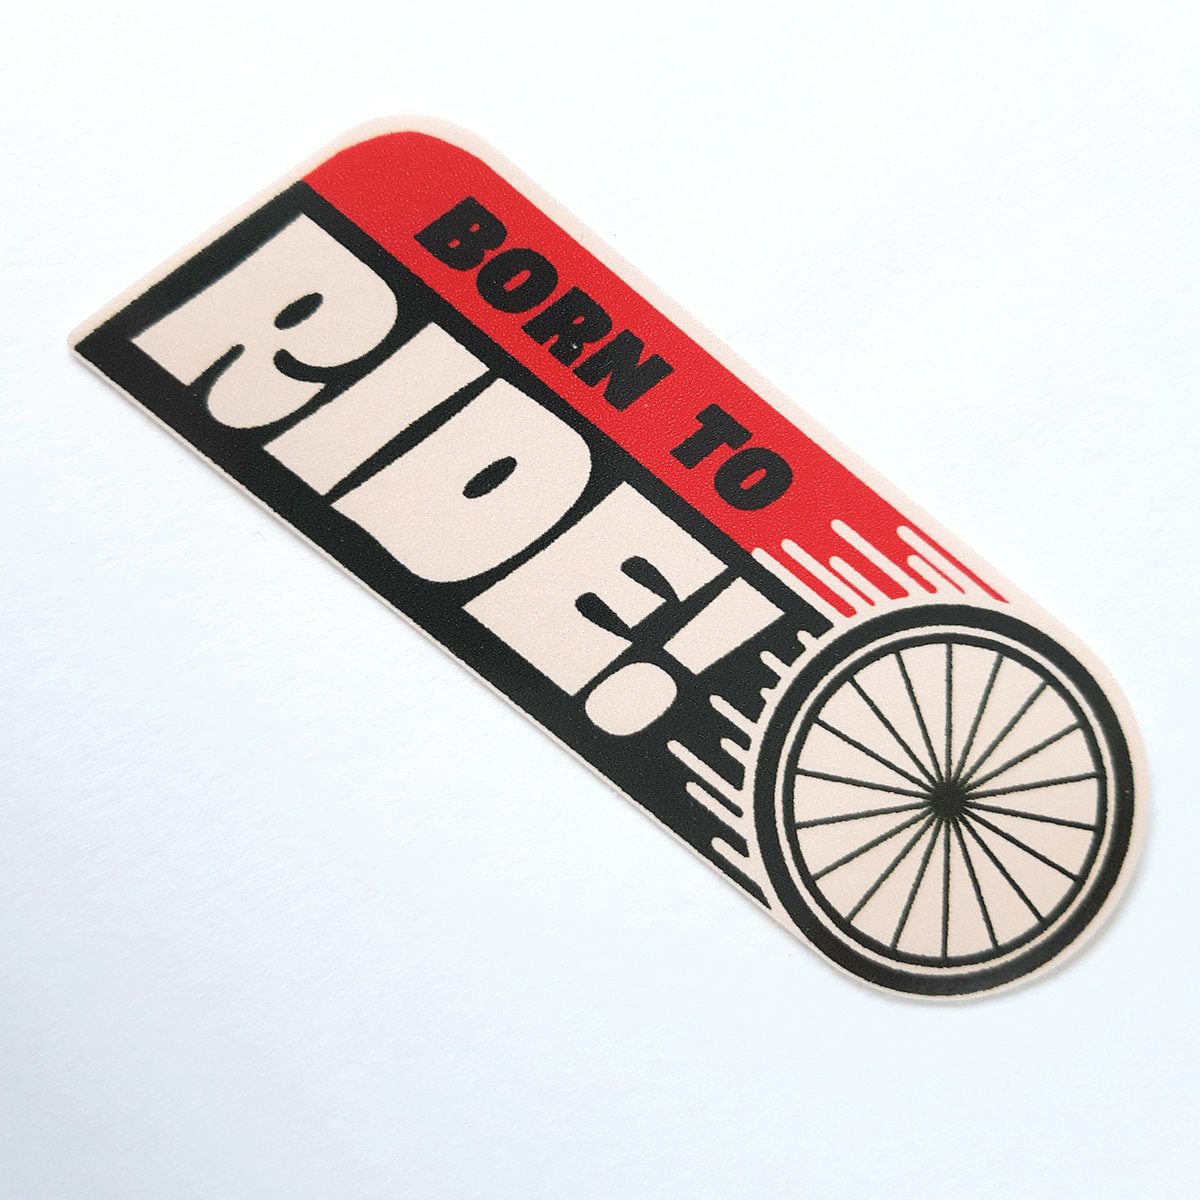 Born To Ride sticker pack